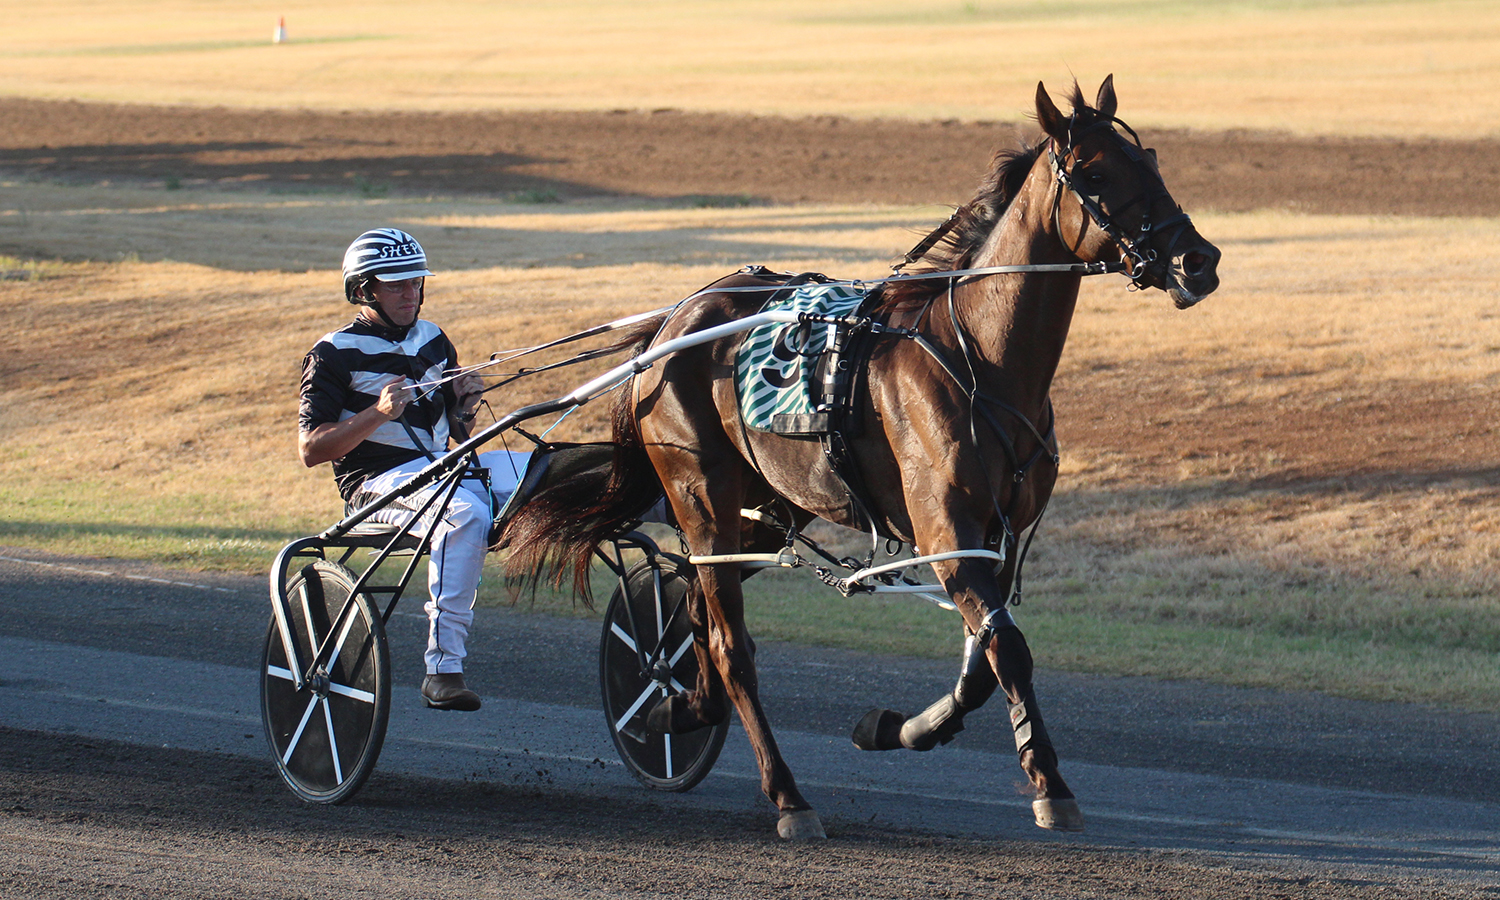 Kid Montana places second at Newcastle meeting